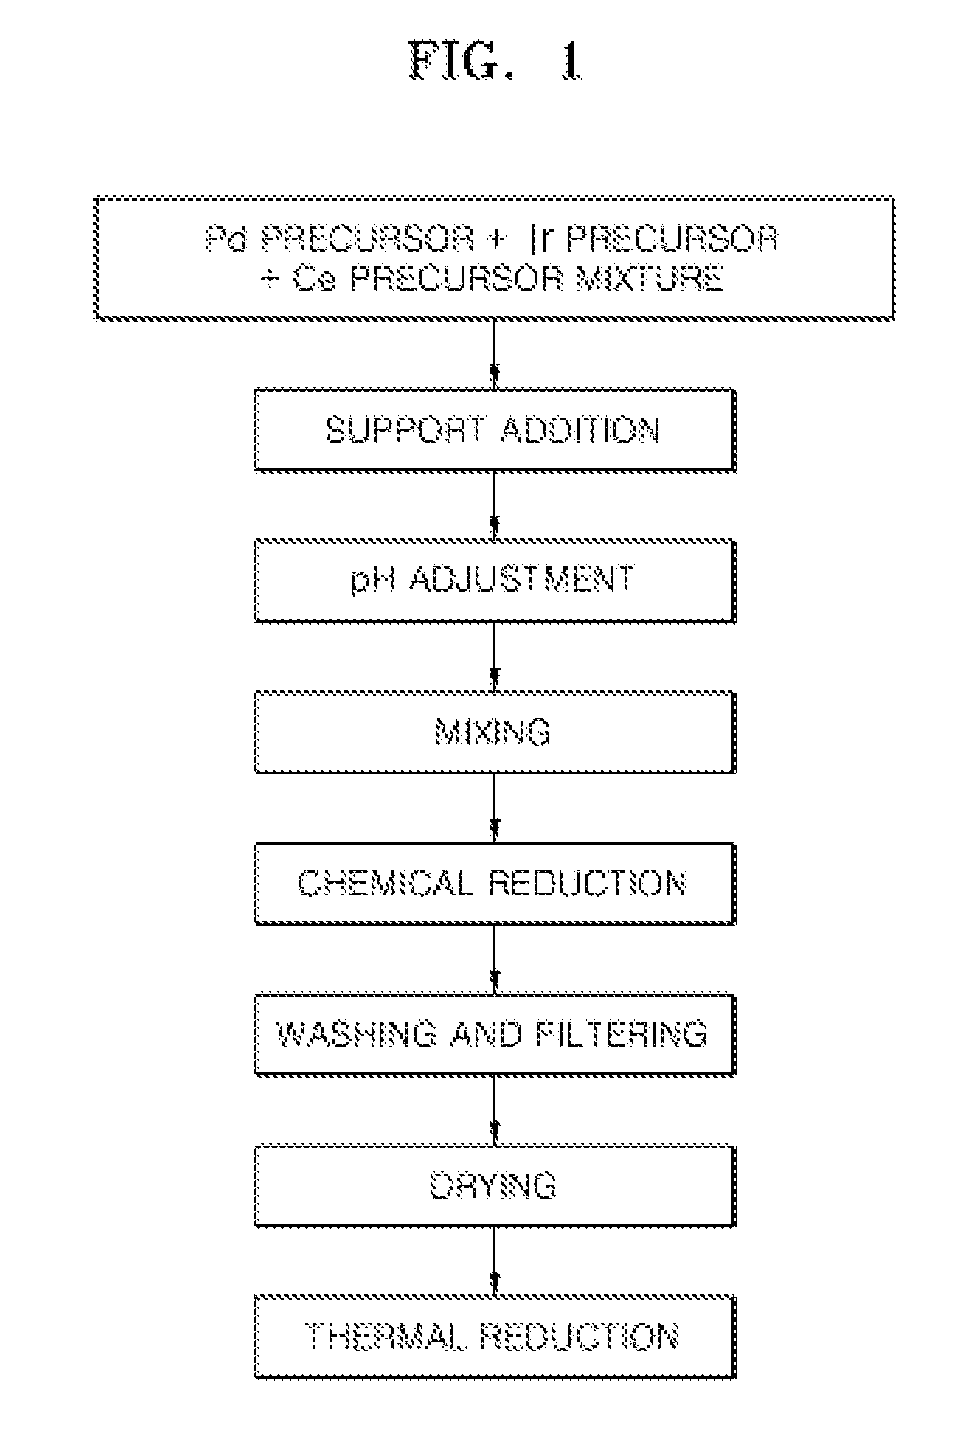 Electrode catalyst for fuel cell, method of preparing electrode catalyst, and fuel cell using electrode catalyst